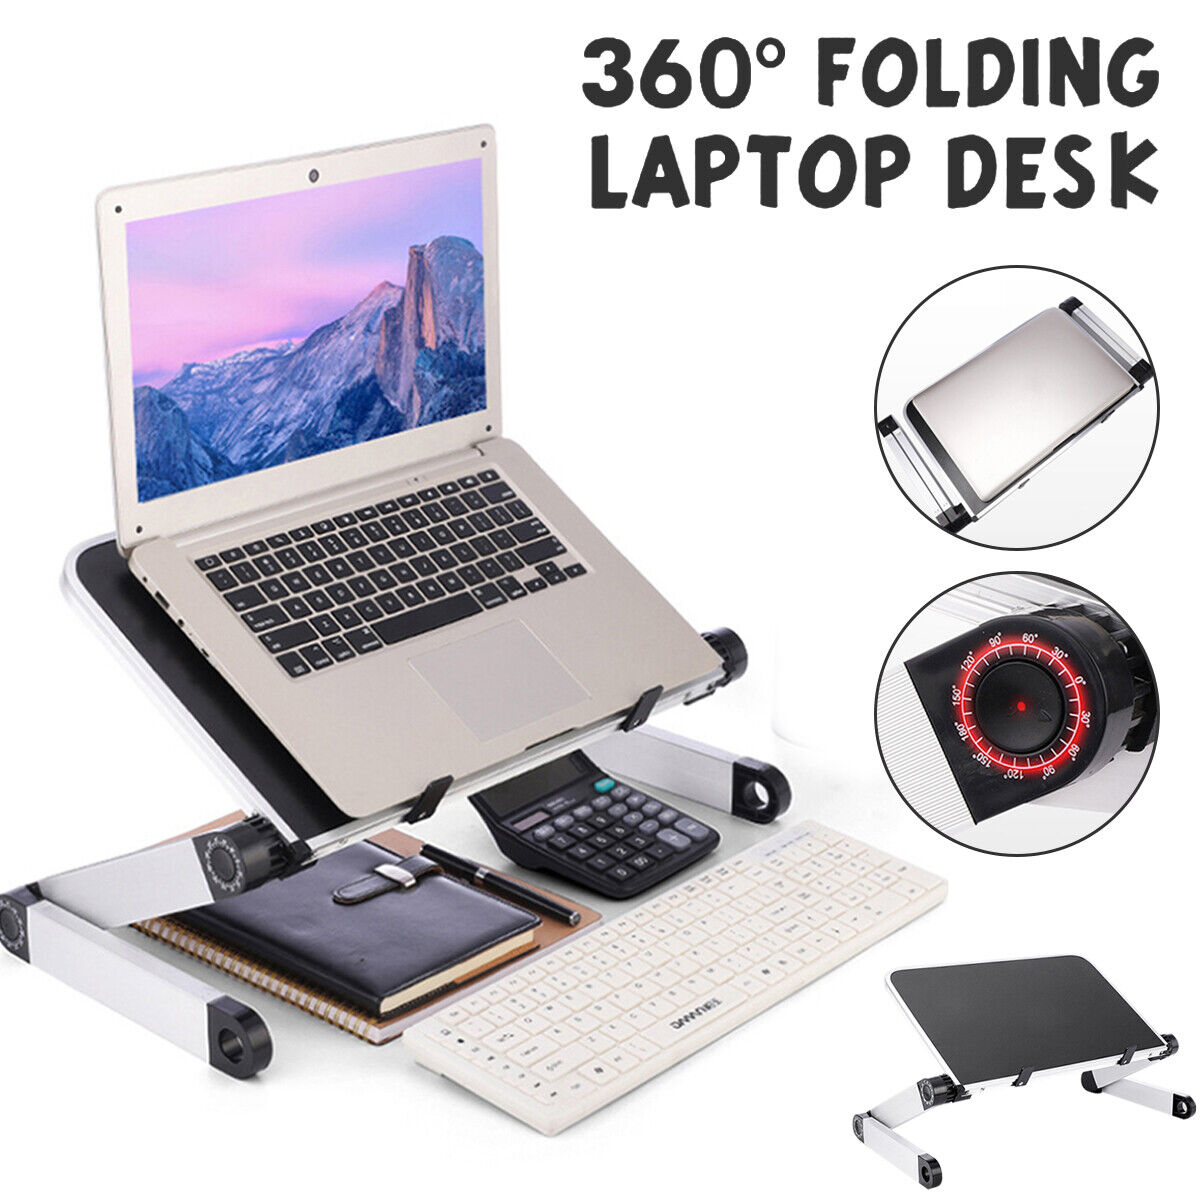 Portable Laptop Desk Foldable Lap Bed Tray Adjustable with COOLING FAN Portabl